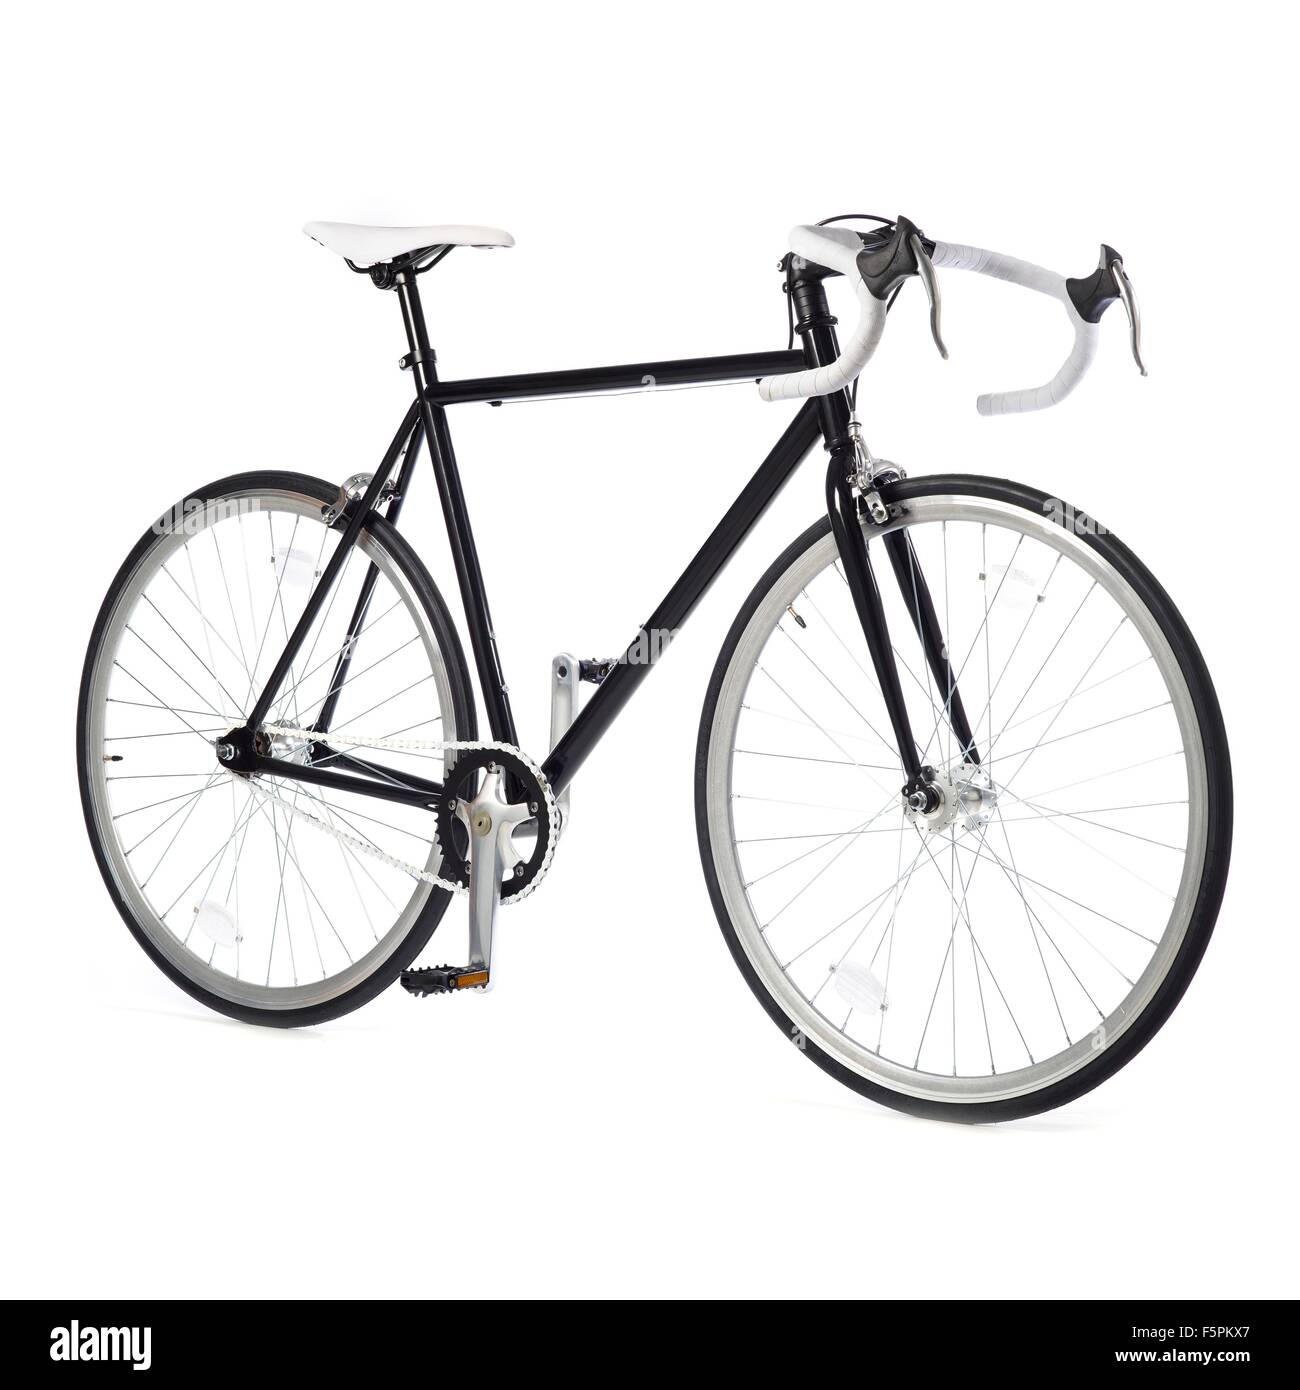 Fixed-gear road bike against a white background. Stock Photo